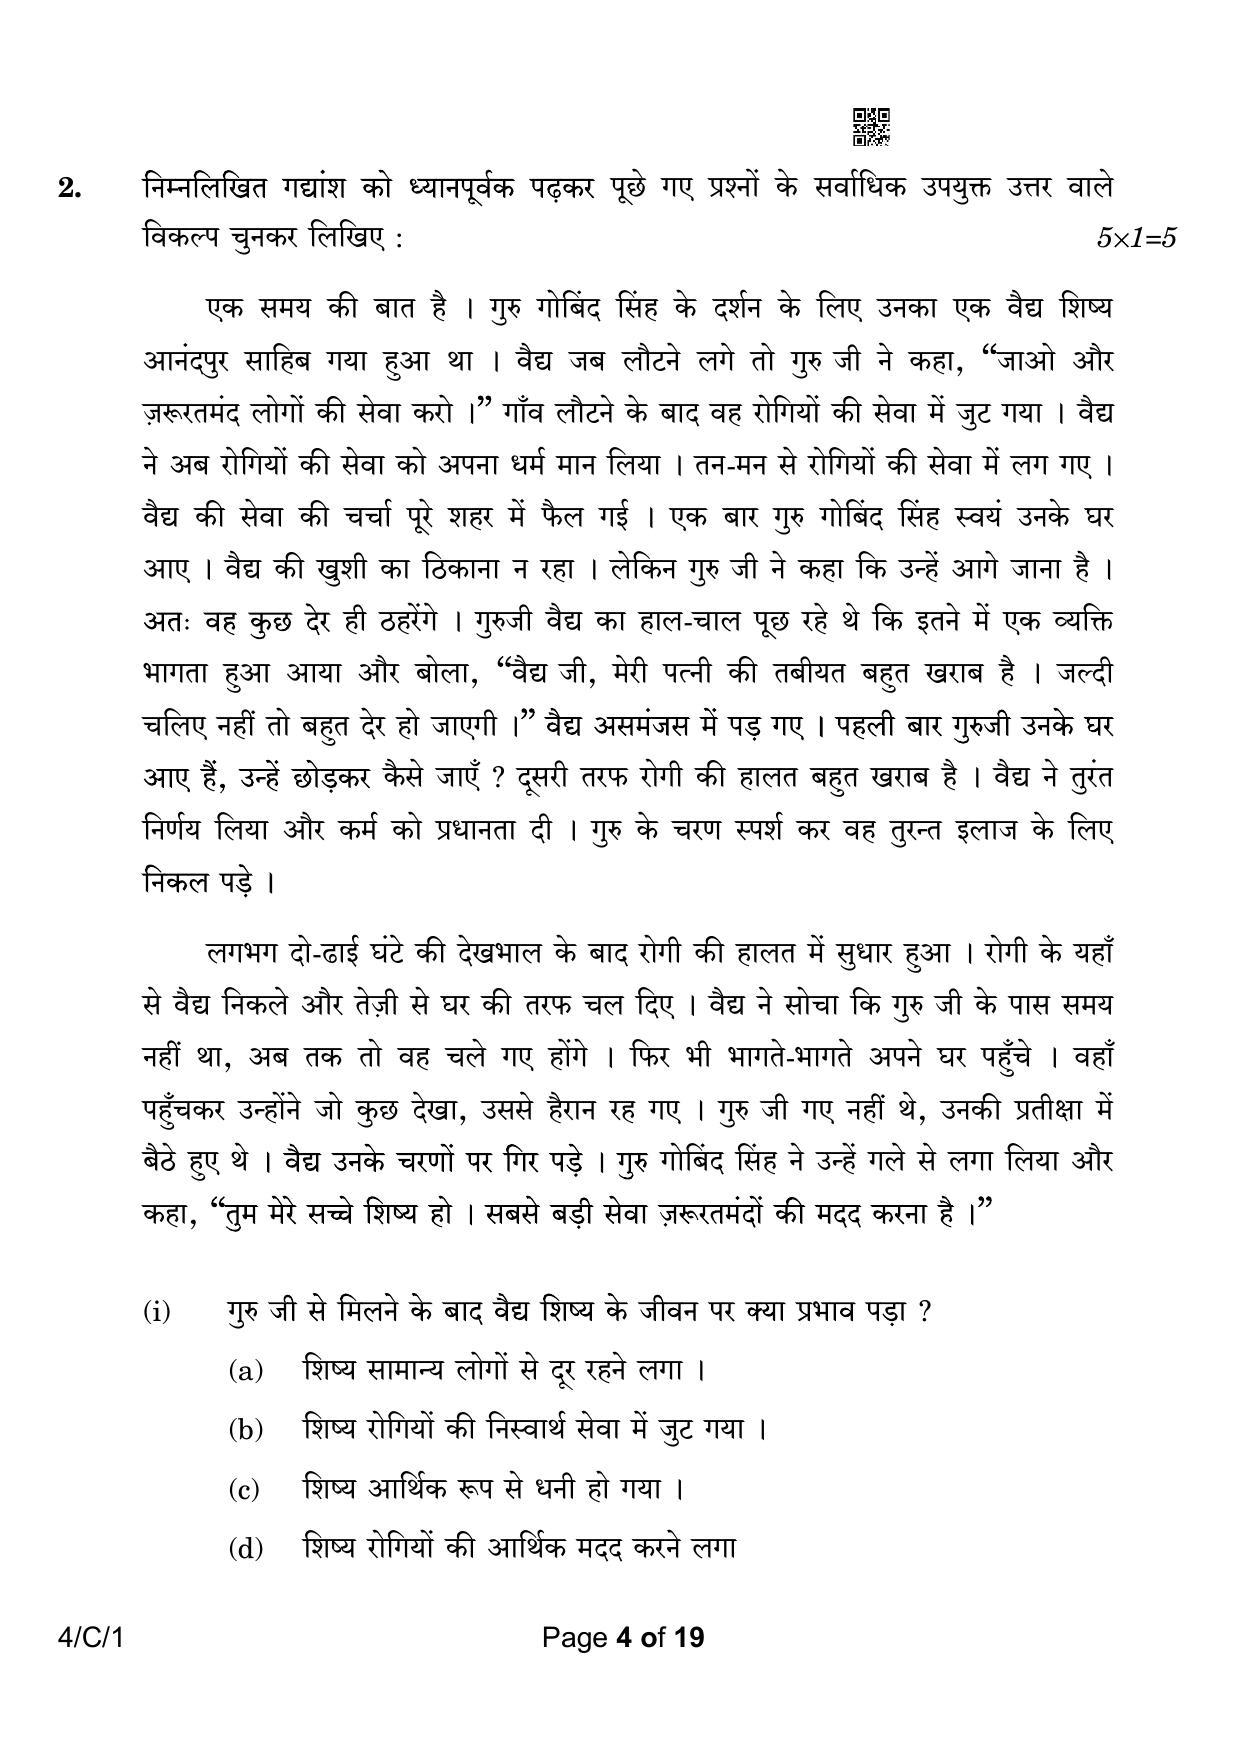 CBSE Class 10 4-1 Hindi B 2023 (Compartment) Question Paper - Page 4